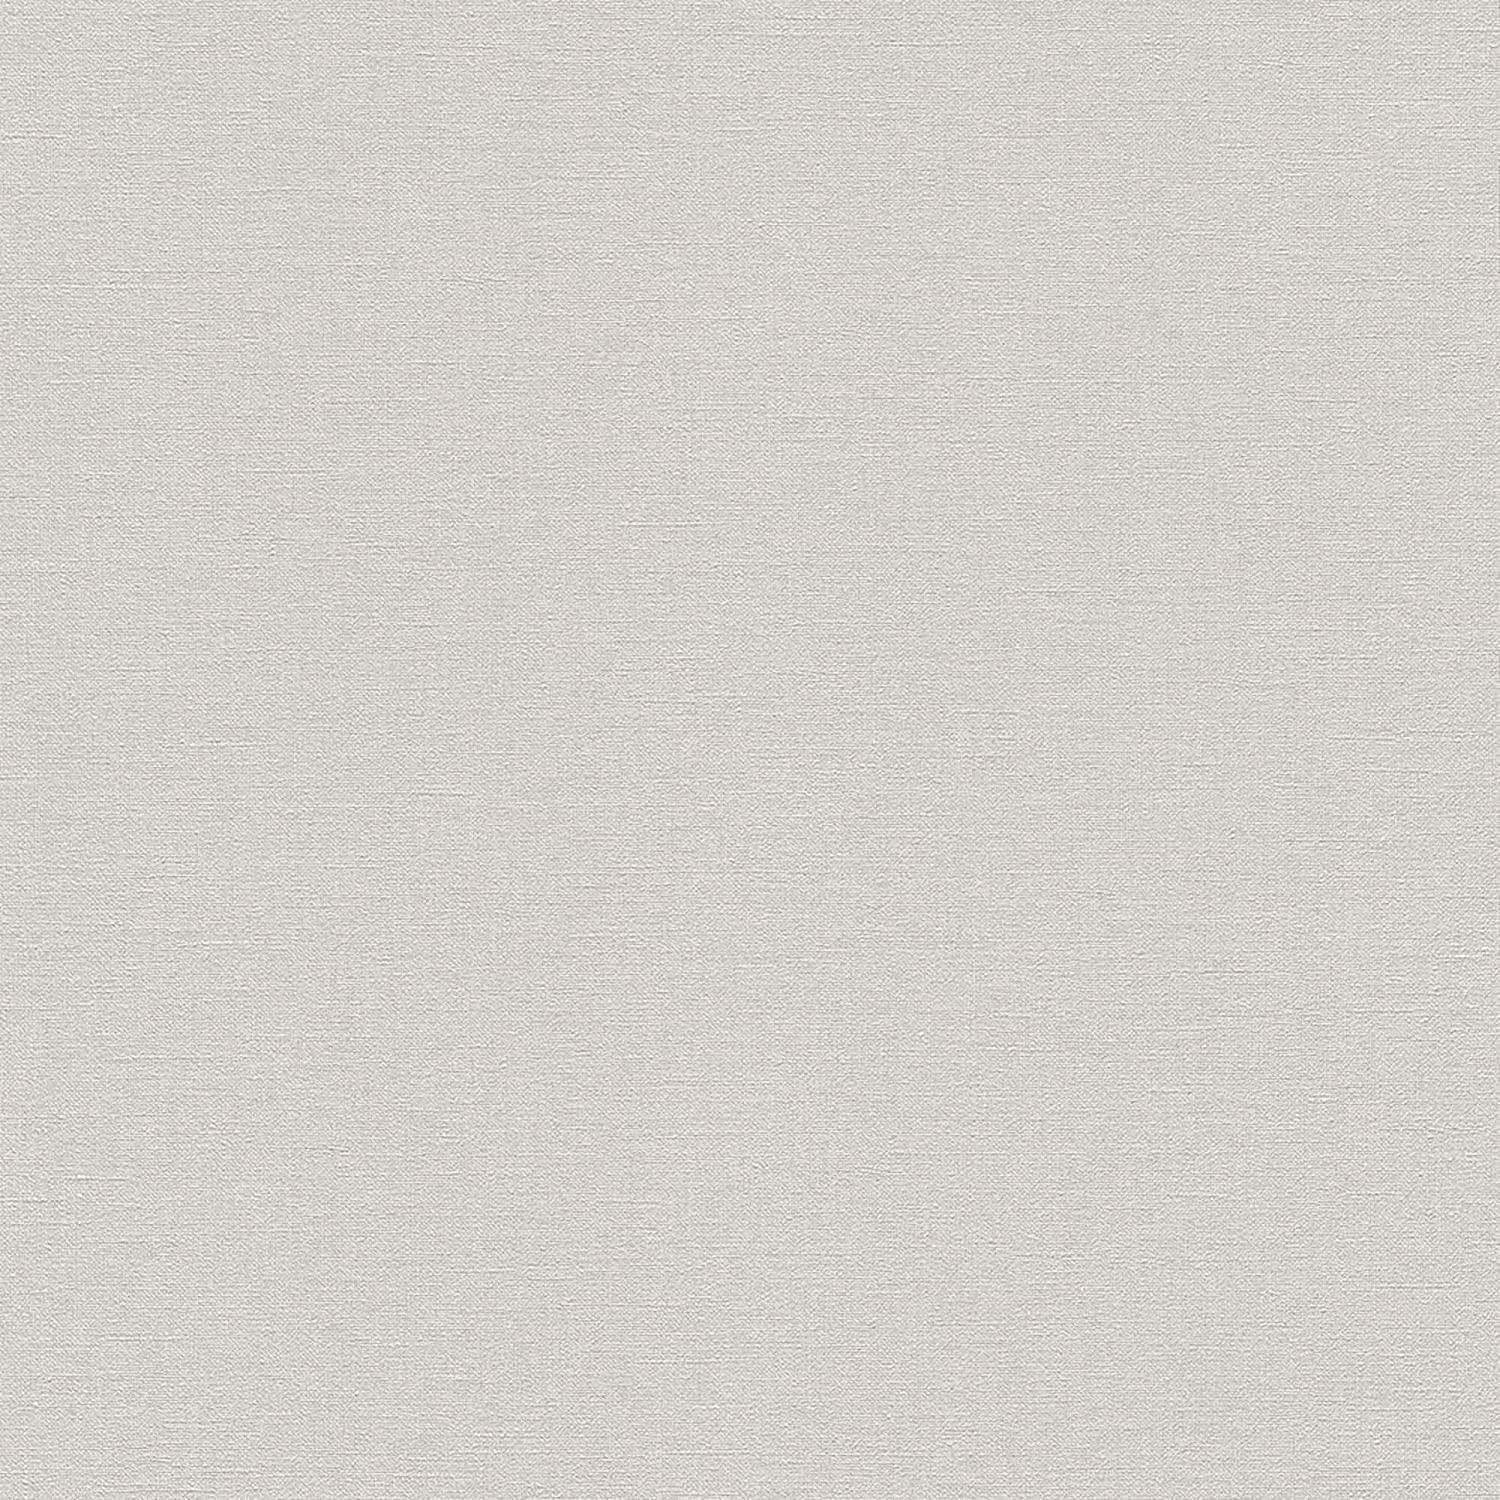 Rasch paperhangings 448610 Non-Woven Wallpaper Collection Florentine